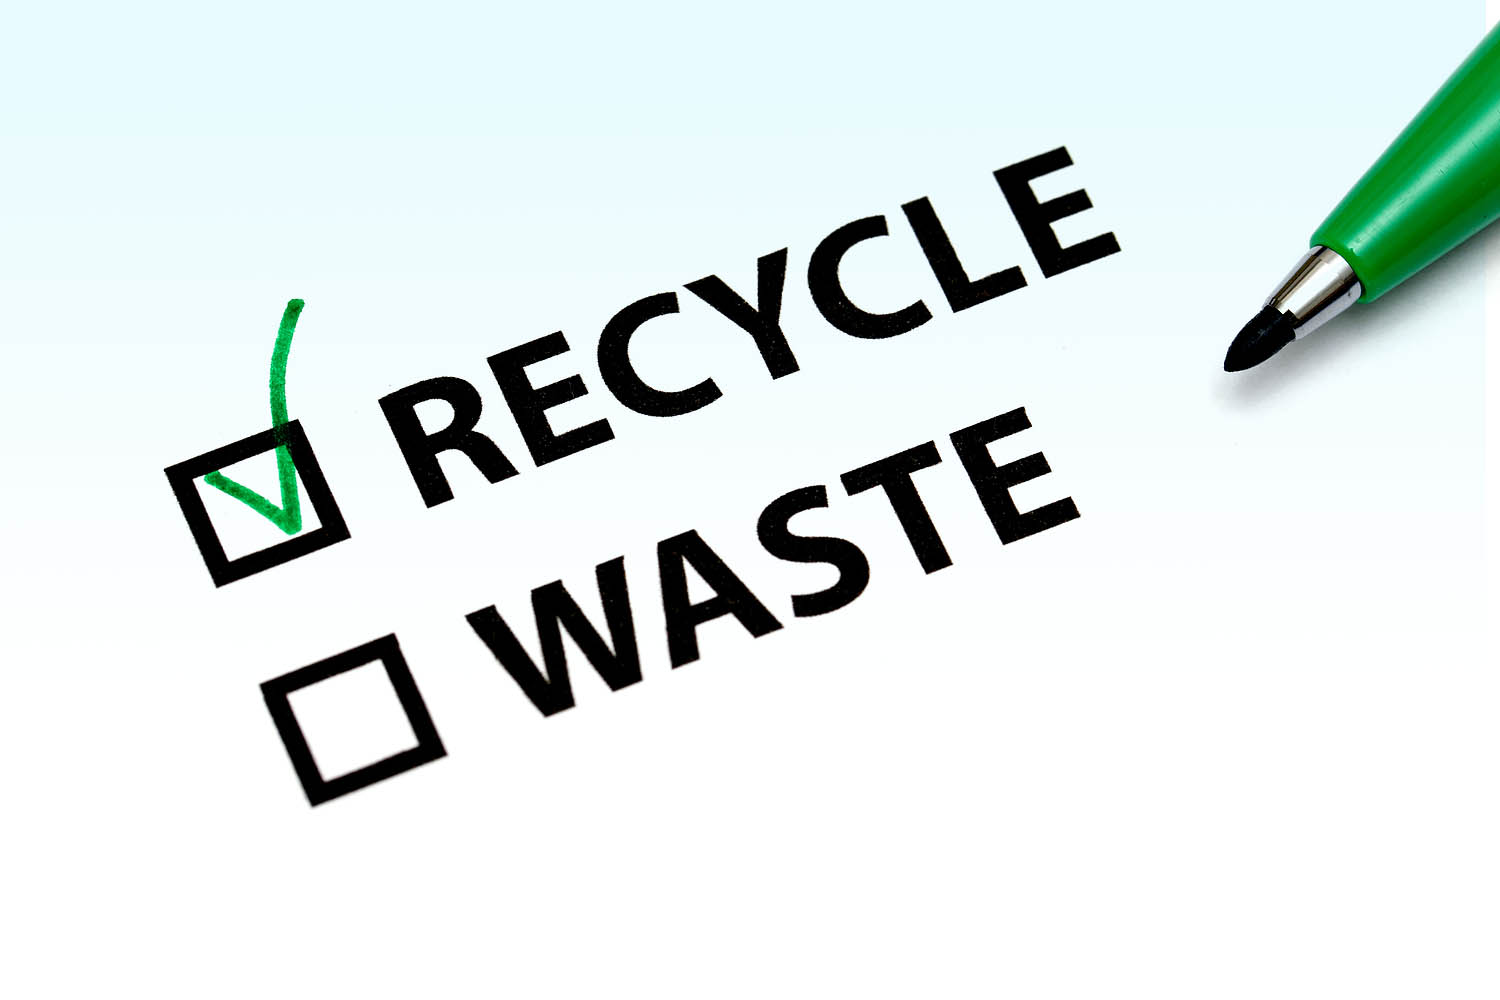 Recycle or Waste checkboxes